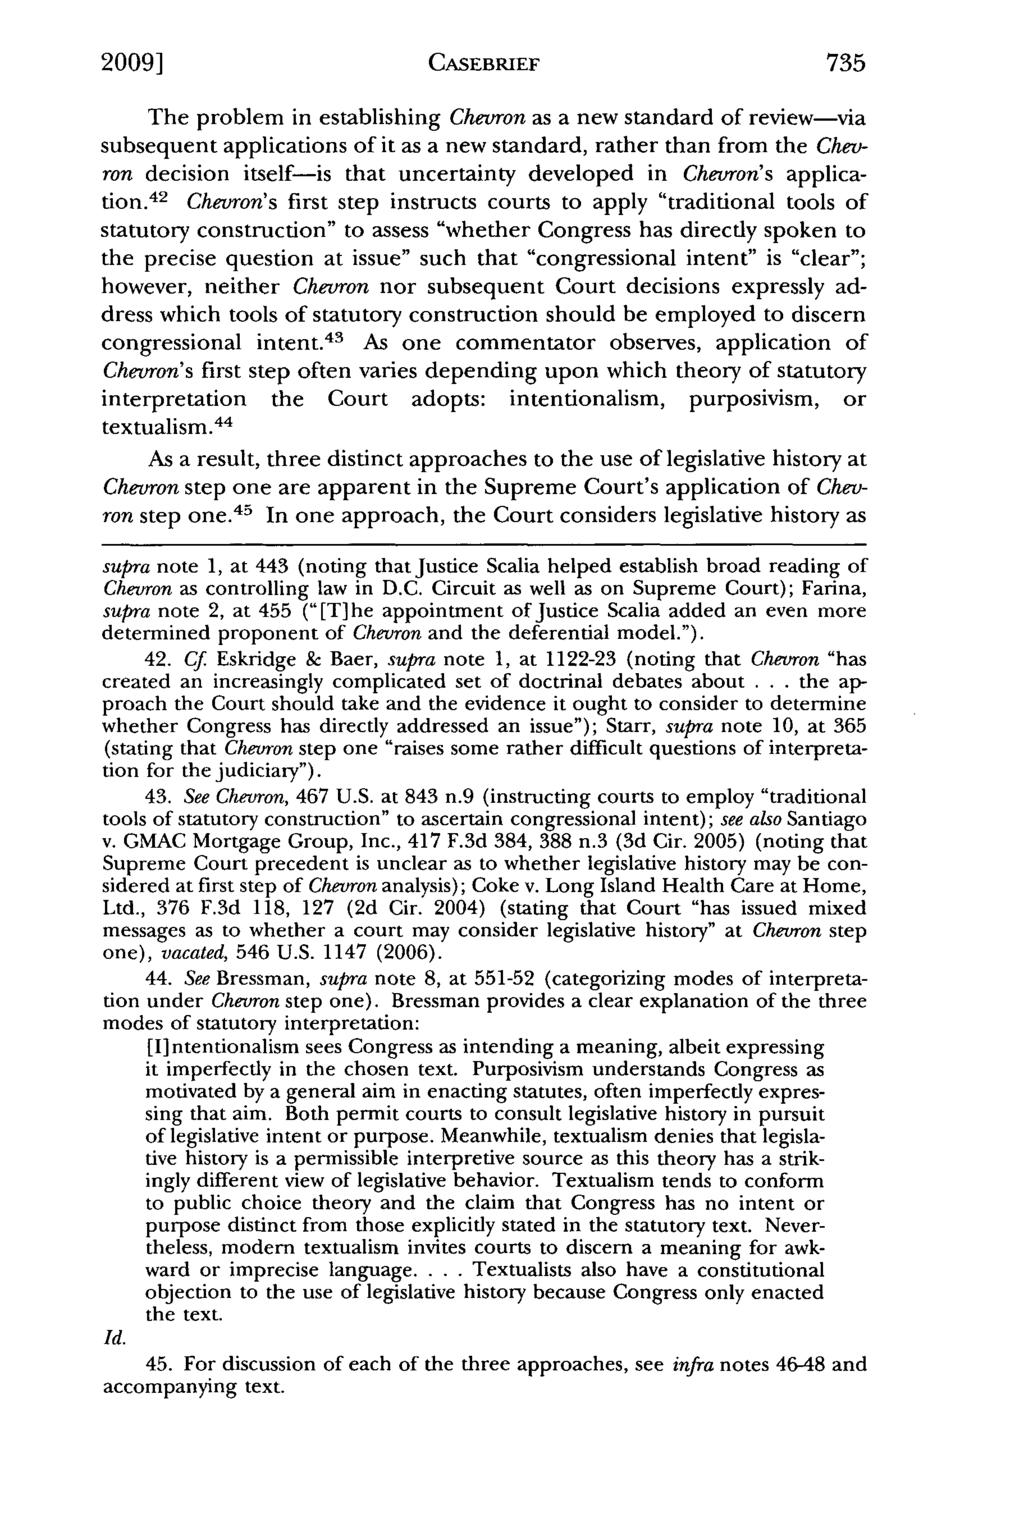 2009] Forte: May Legislative History Be Considered at Chevron Step One: The Th CASEBRIEF The problem in establishing Chevron as a new standard of review-via subsequent applications of it as a new